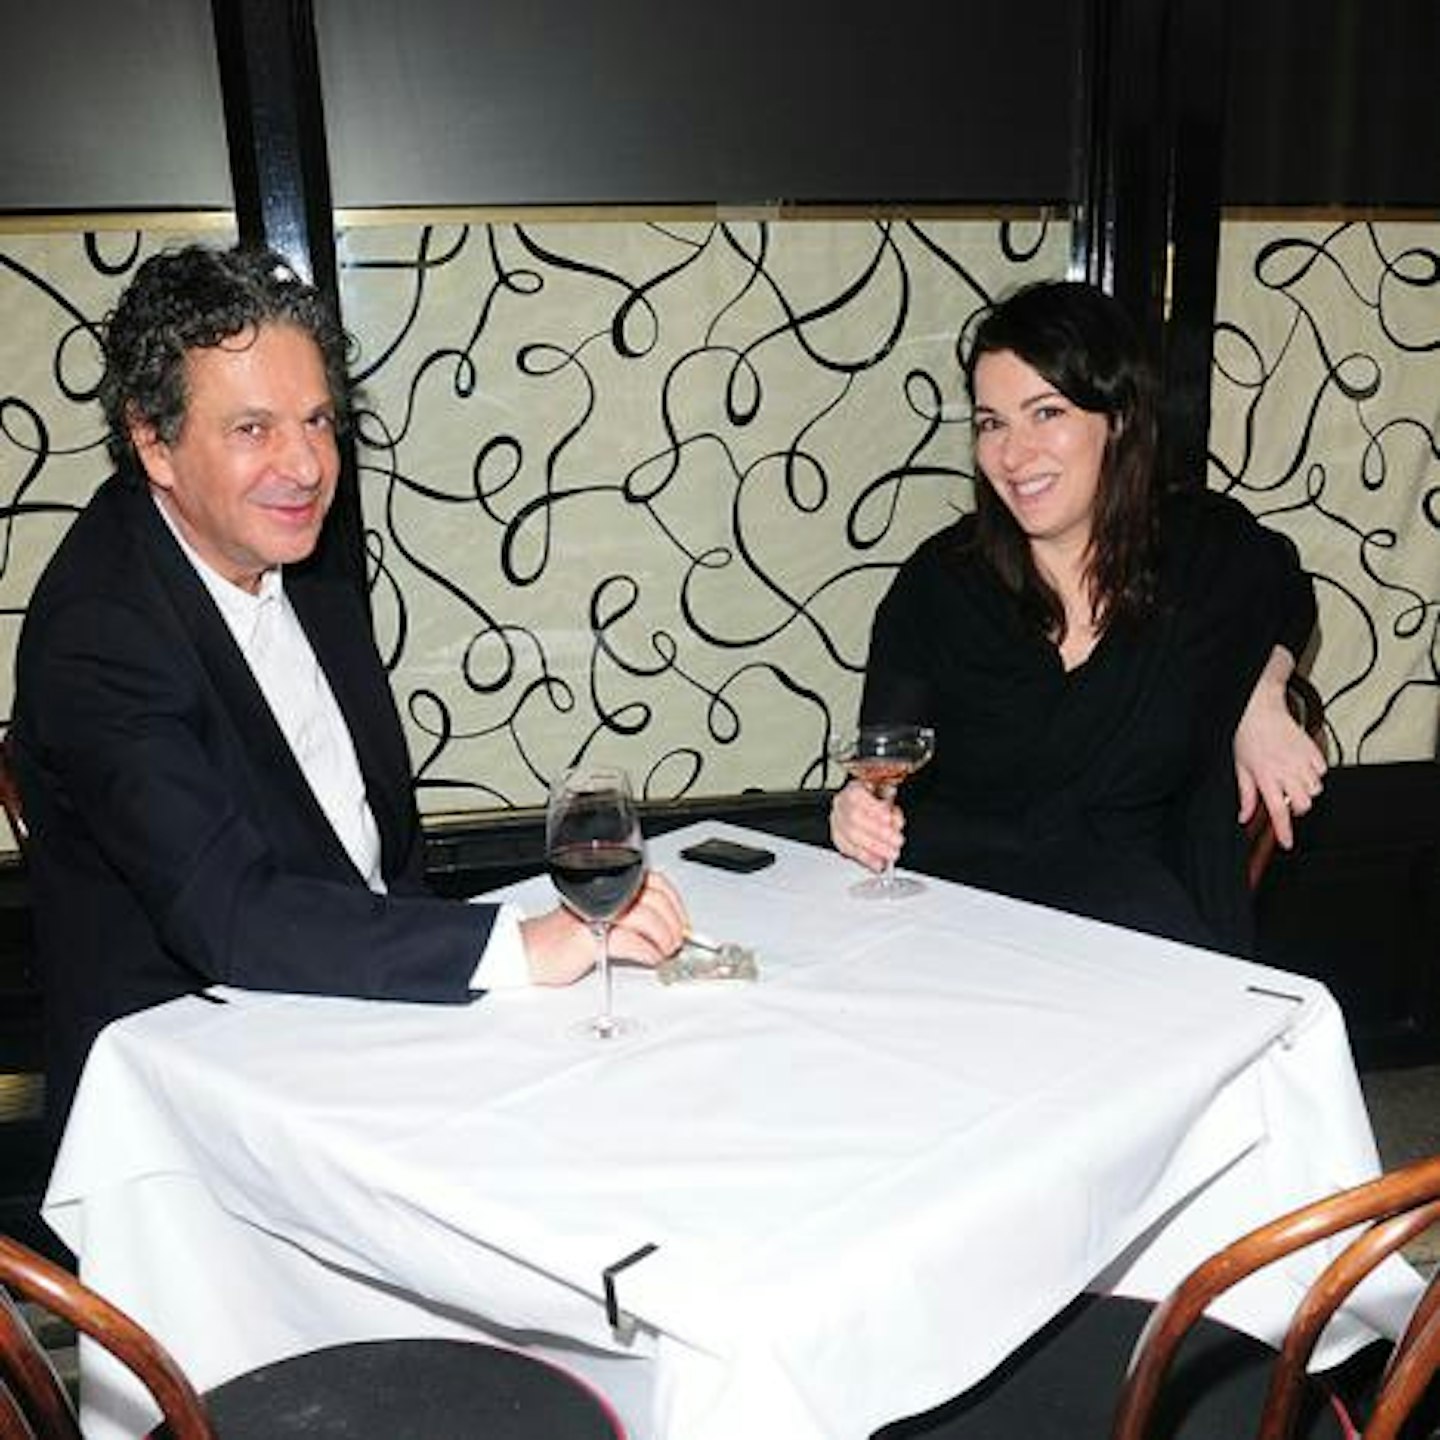 Nigella and Charles pictured outside the Mayfair restaurant in 2009